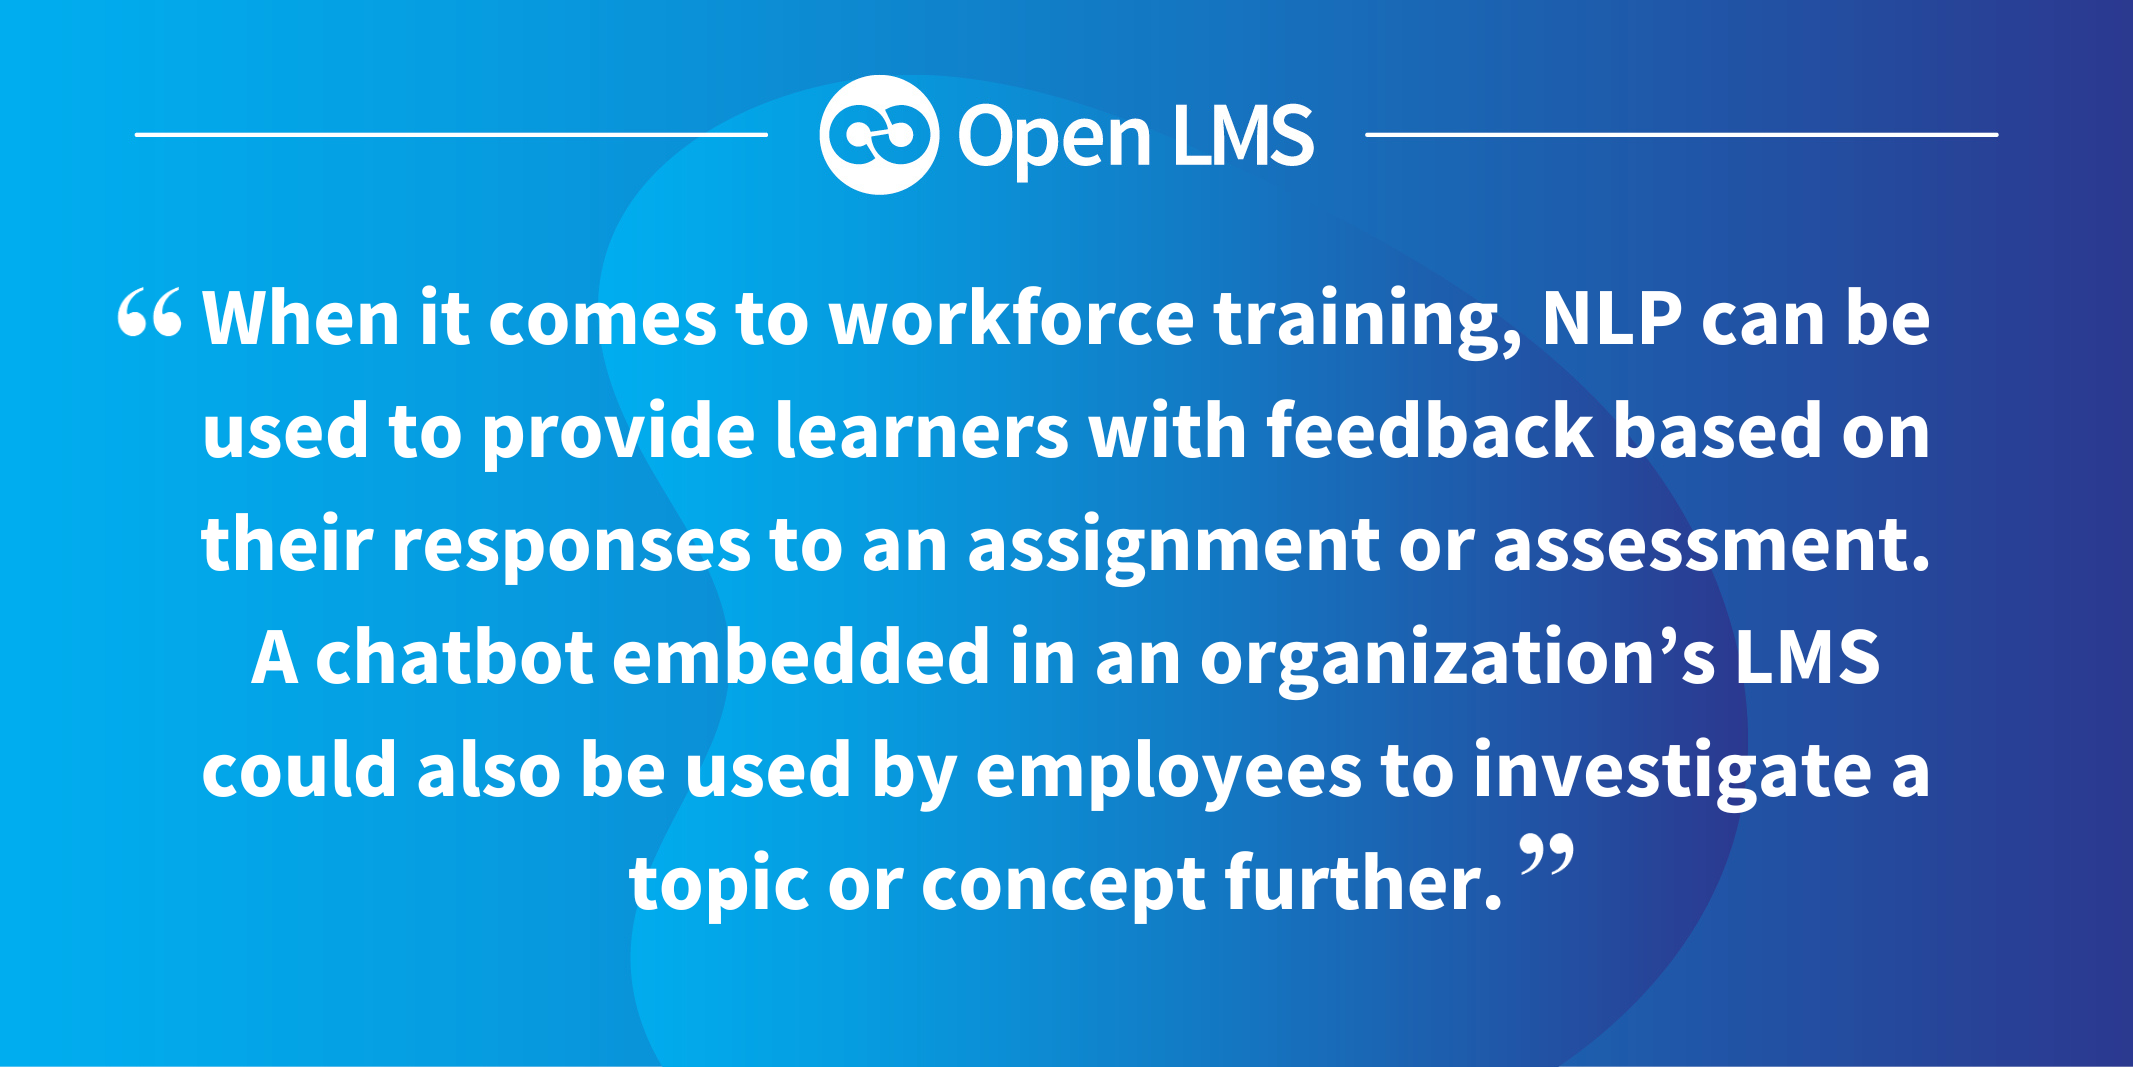 When it comes to workforce training, NLP can be used to provide learners with feedback based on their responses to an assignment or assessment. A chatbot embedded in an organization’s LMS could also be used by employees to investigate a topic or concept further.